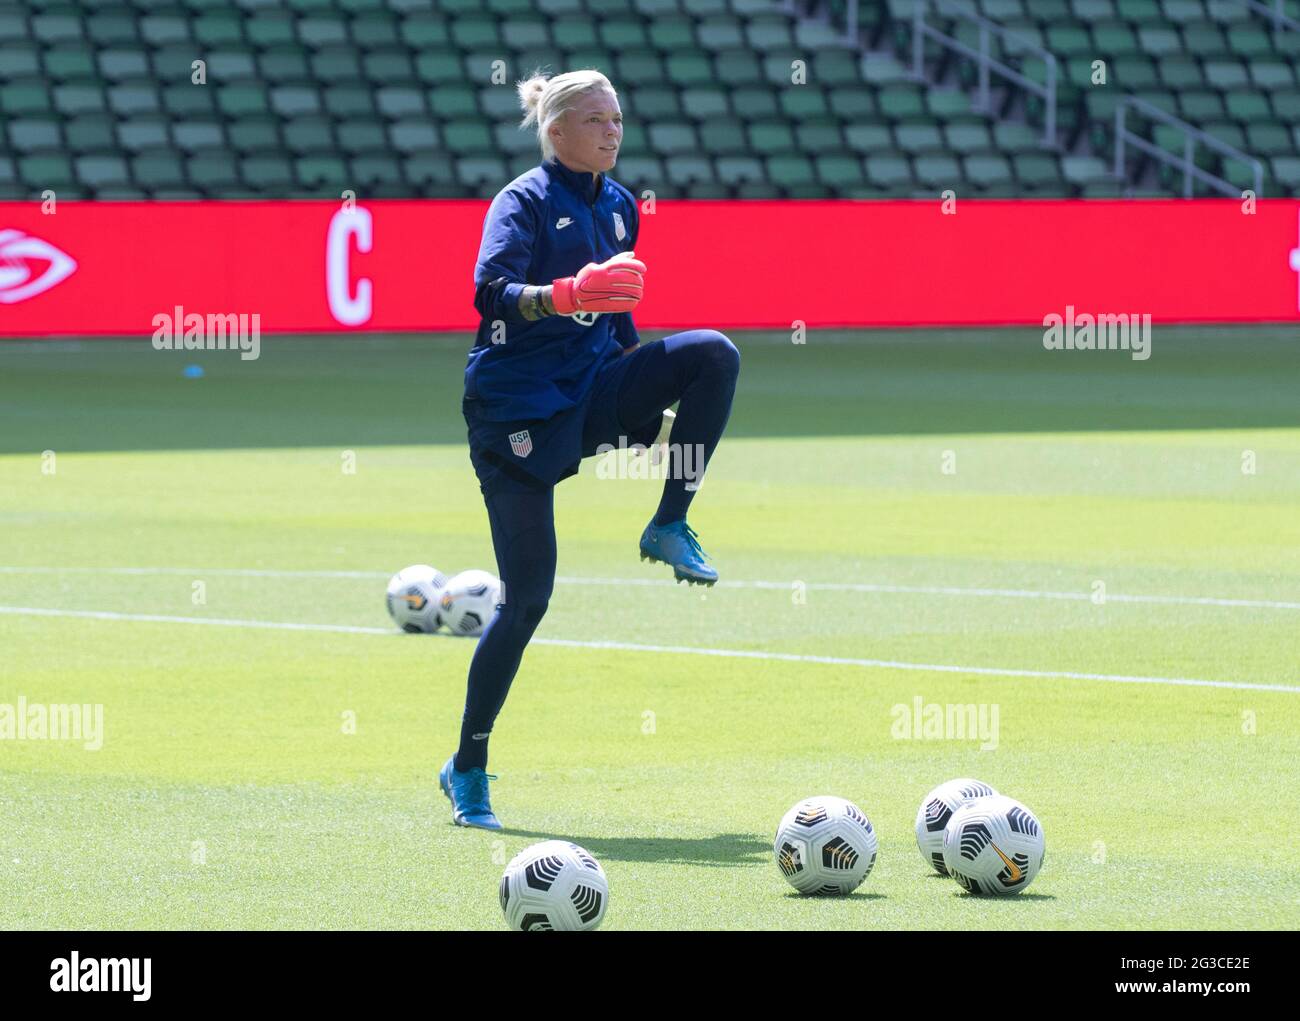 Austin, Texas, USA. 15th June, 2021. Goalkeeper JANE CAMPBELL warms up as members of the United States Women's National Team (USWNT) warm up at the new Q2 soccer stadium in Austin during one of the final games on their road to the 2021 okyo Olympics. The team will play a friendly with Nigeria on Wednesday evening. Credit: Bob Daemmrich/ZUMA Wire/Alamy Live News Stock Photo